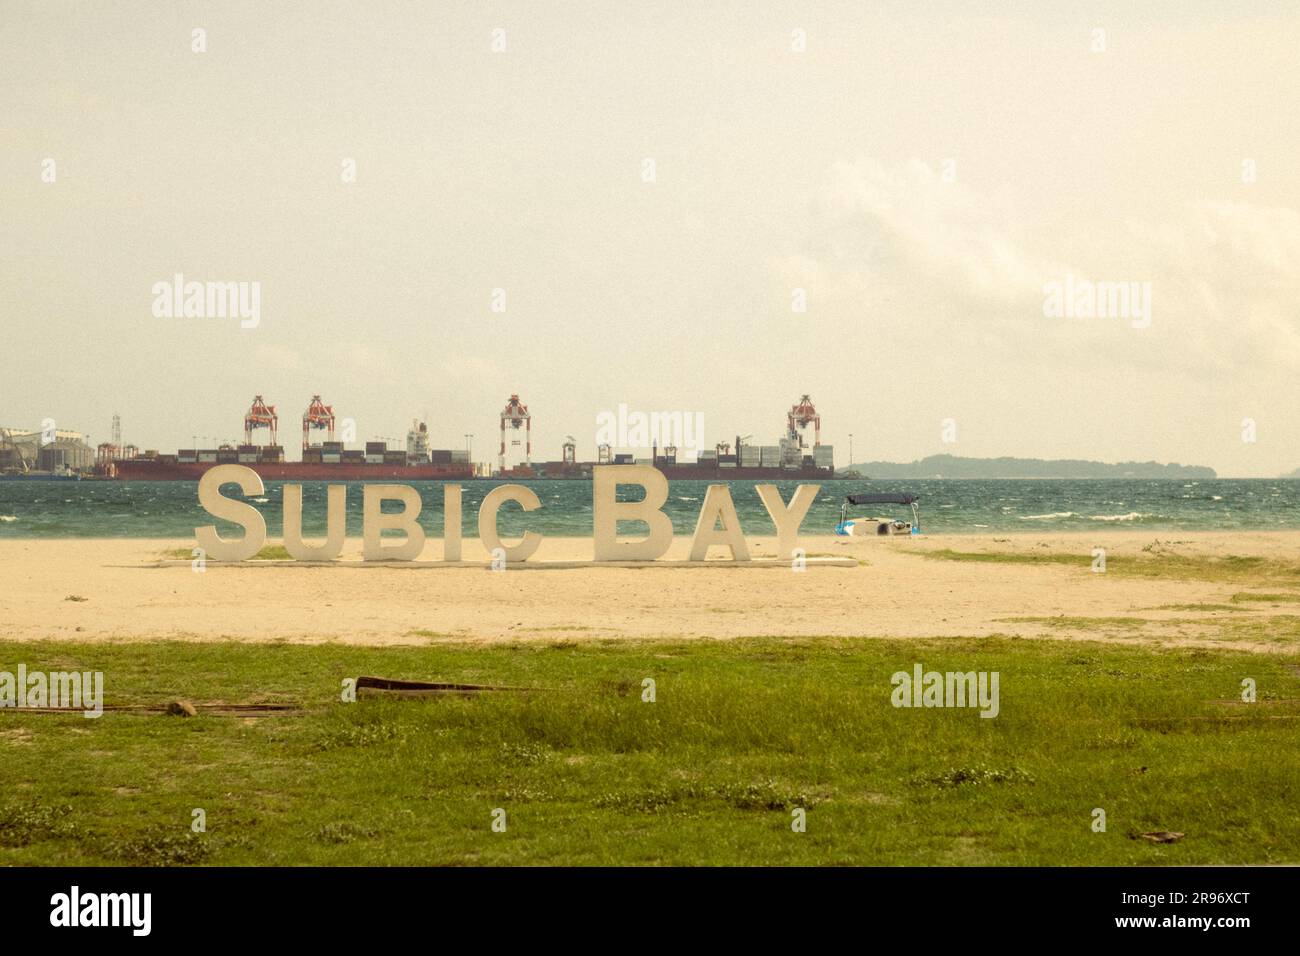 Subic Bay sign in Subic Bay, Philippines Stock Photo